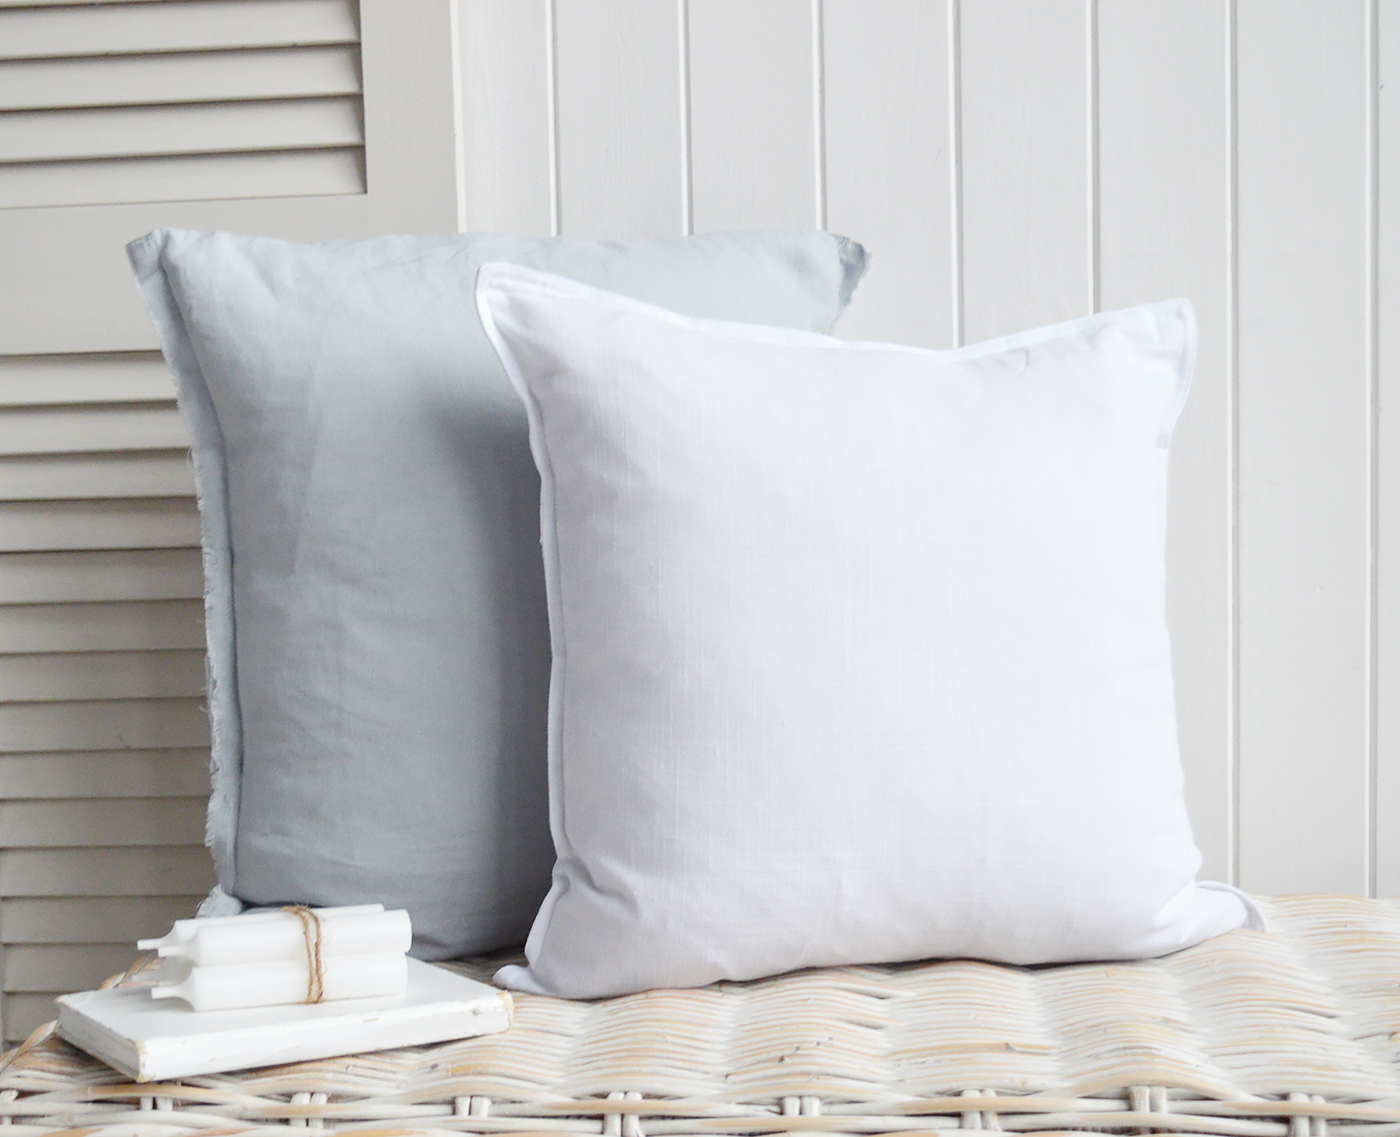 The pale blue and white linen cushion covers for a subtle coastal vibe